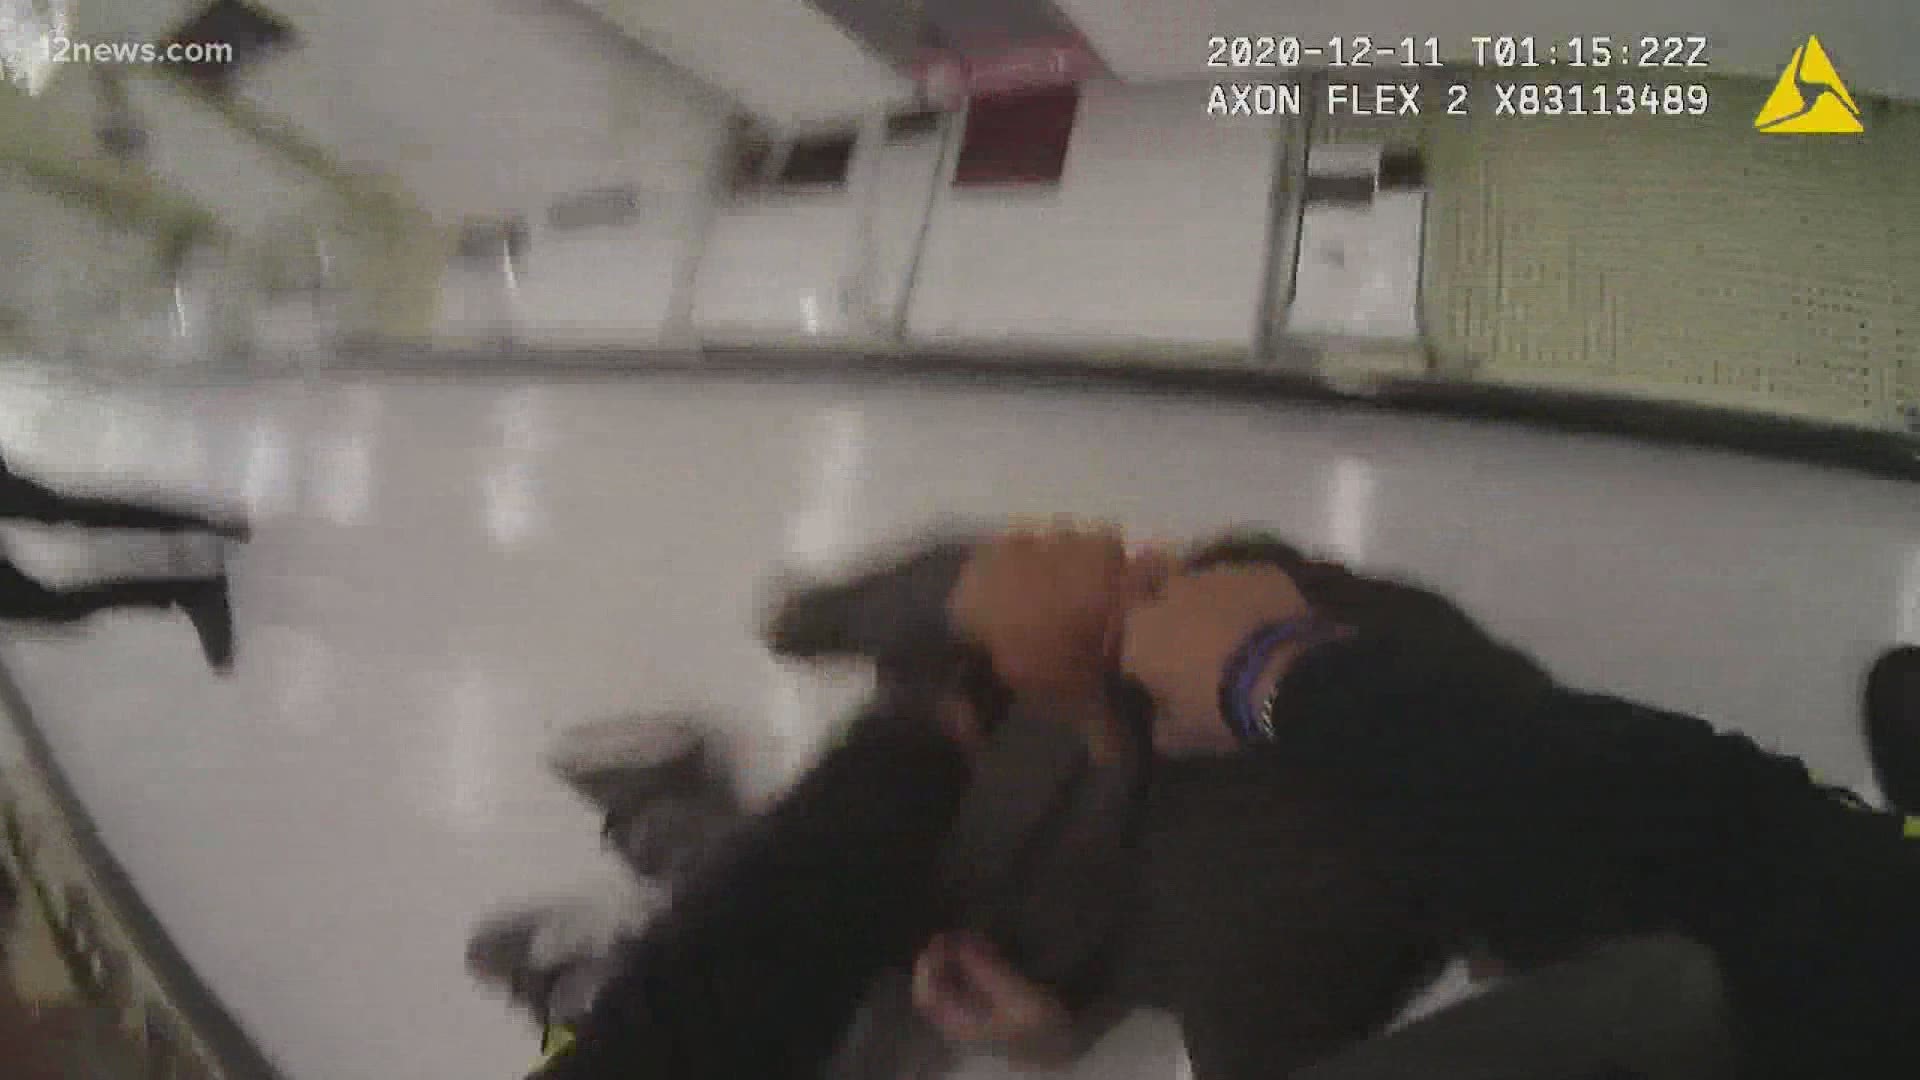 New bodycam footage has surfaced from an officer-involved shooting in a Hobby Lobby on Dec. 10.